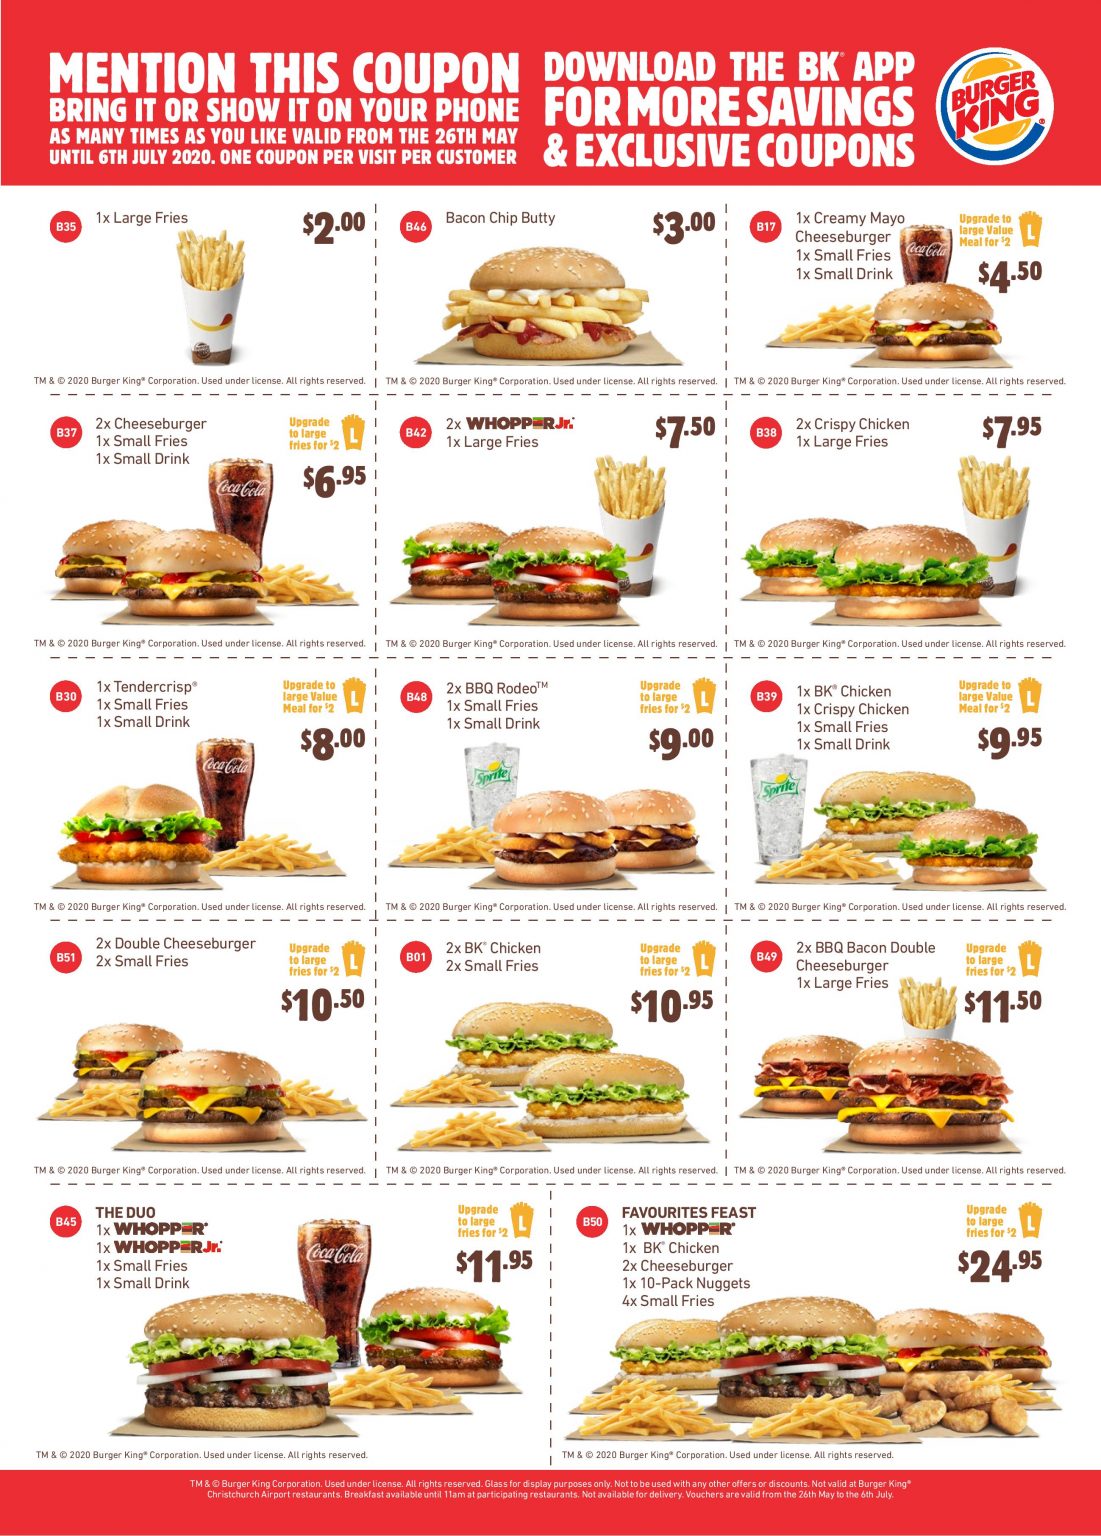 DEAL Burger King Coupons valid until 6 July 2020 Latest BK Coupons